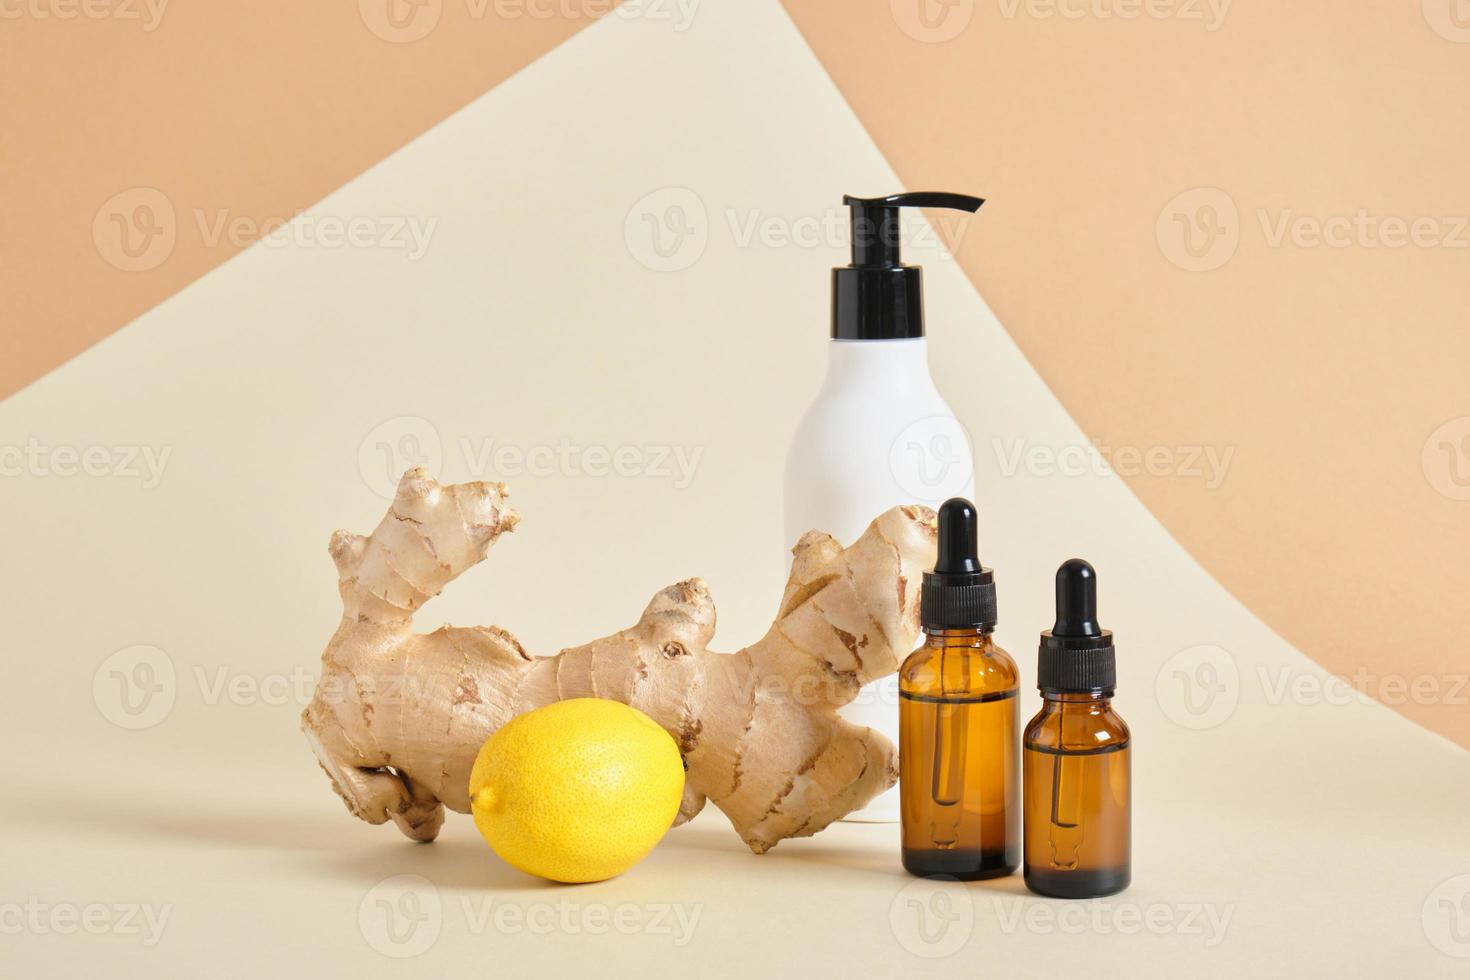 lemon, cream bottle with dispenser, amber glass dropper bottles and ginger root on beige background copy space photo